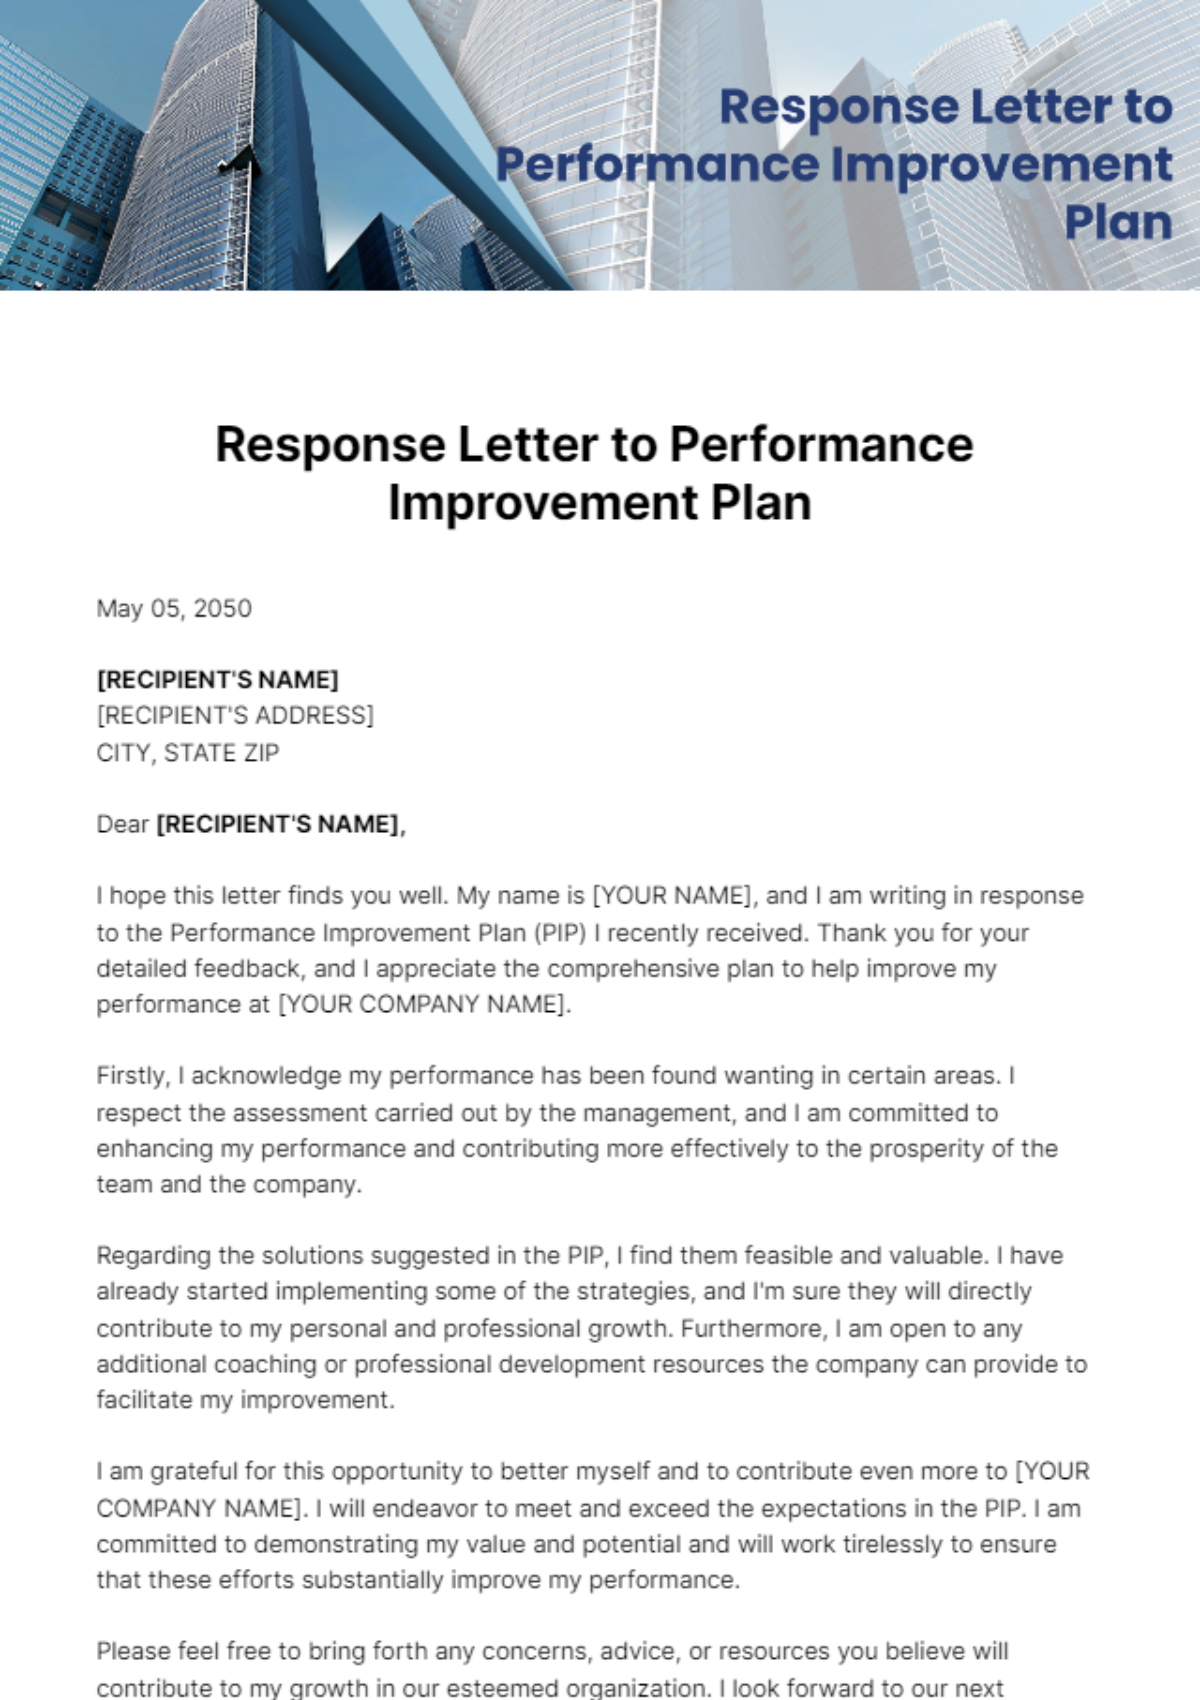 Free Response Letter to Performance Improvement Plan Template